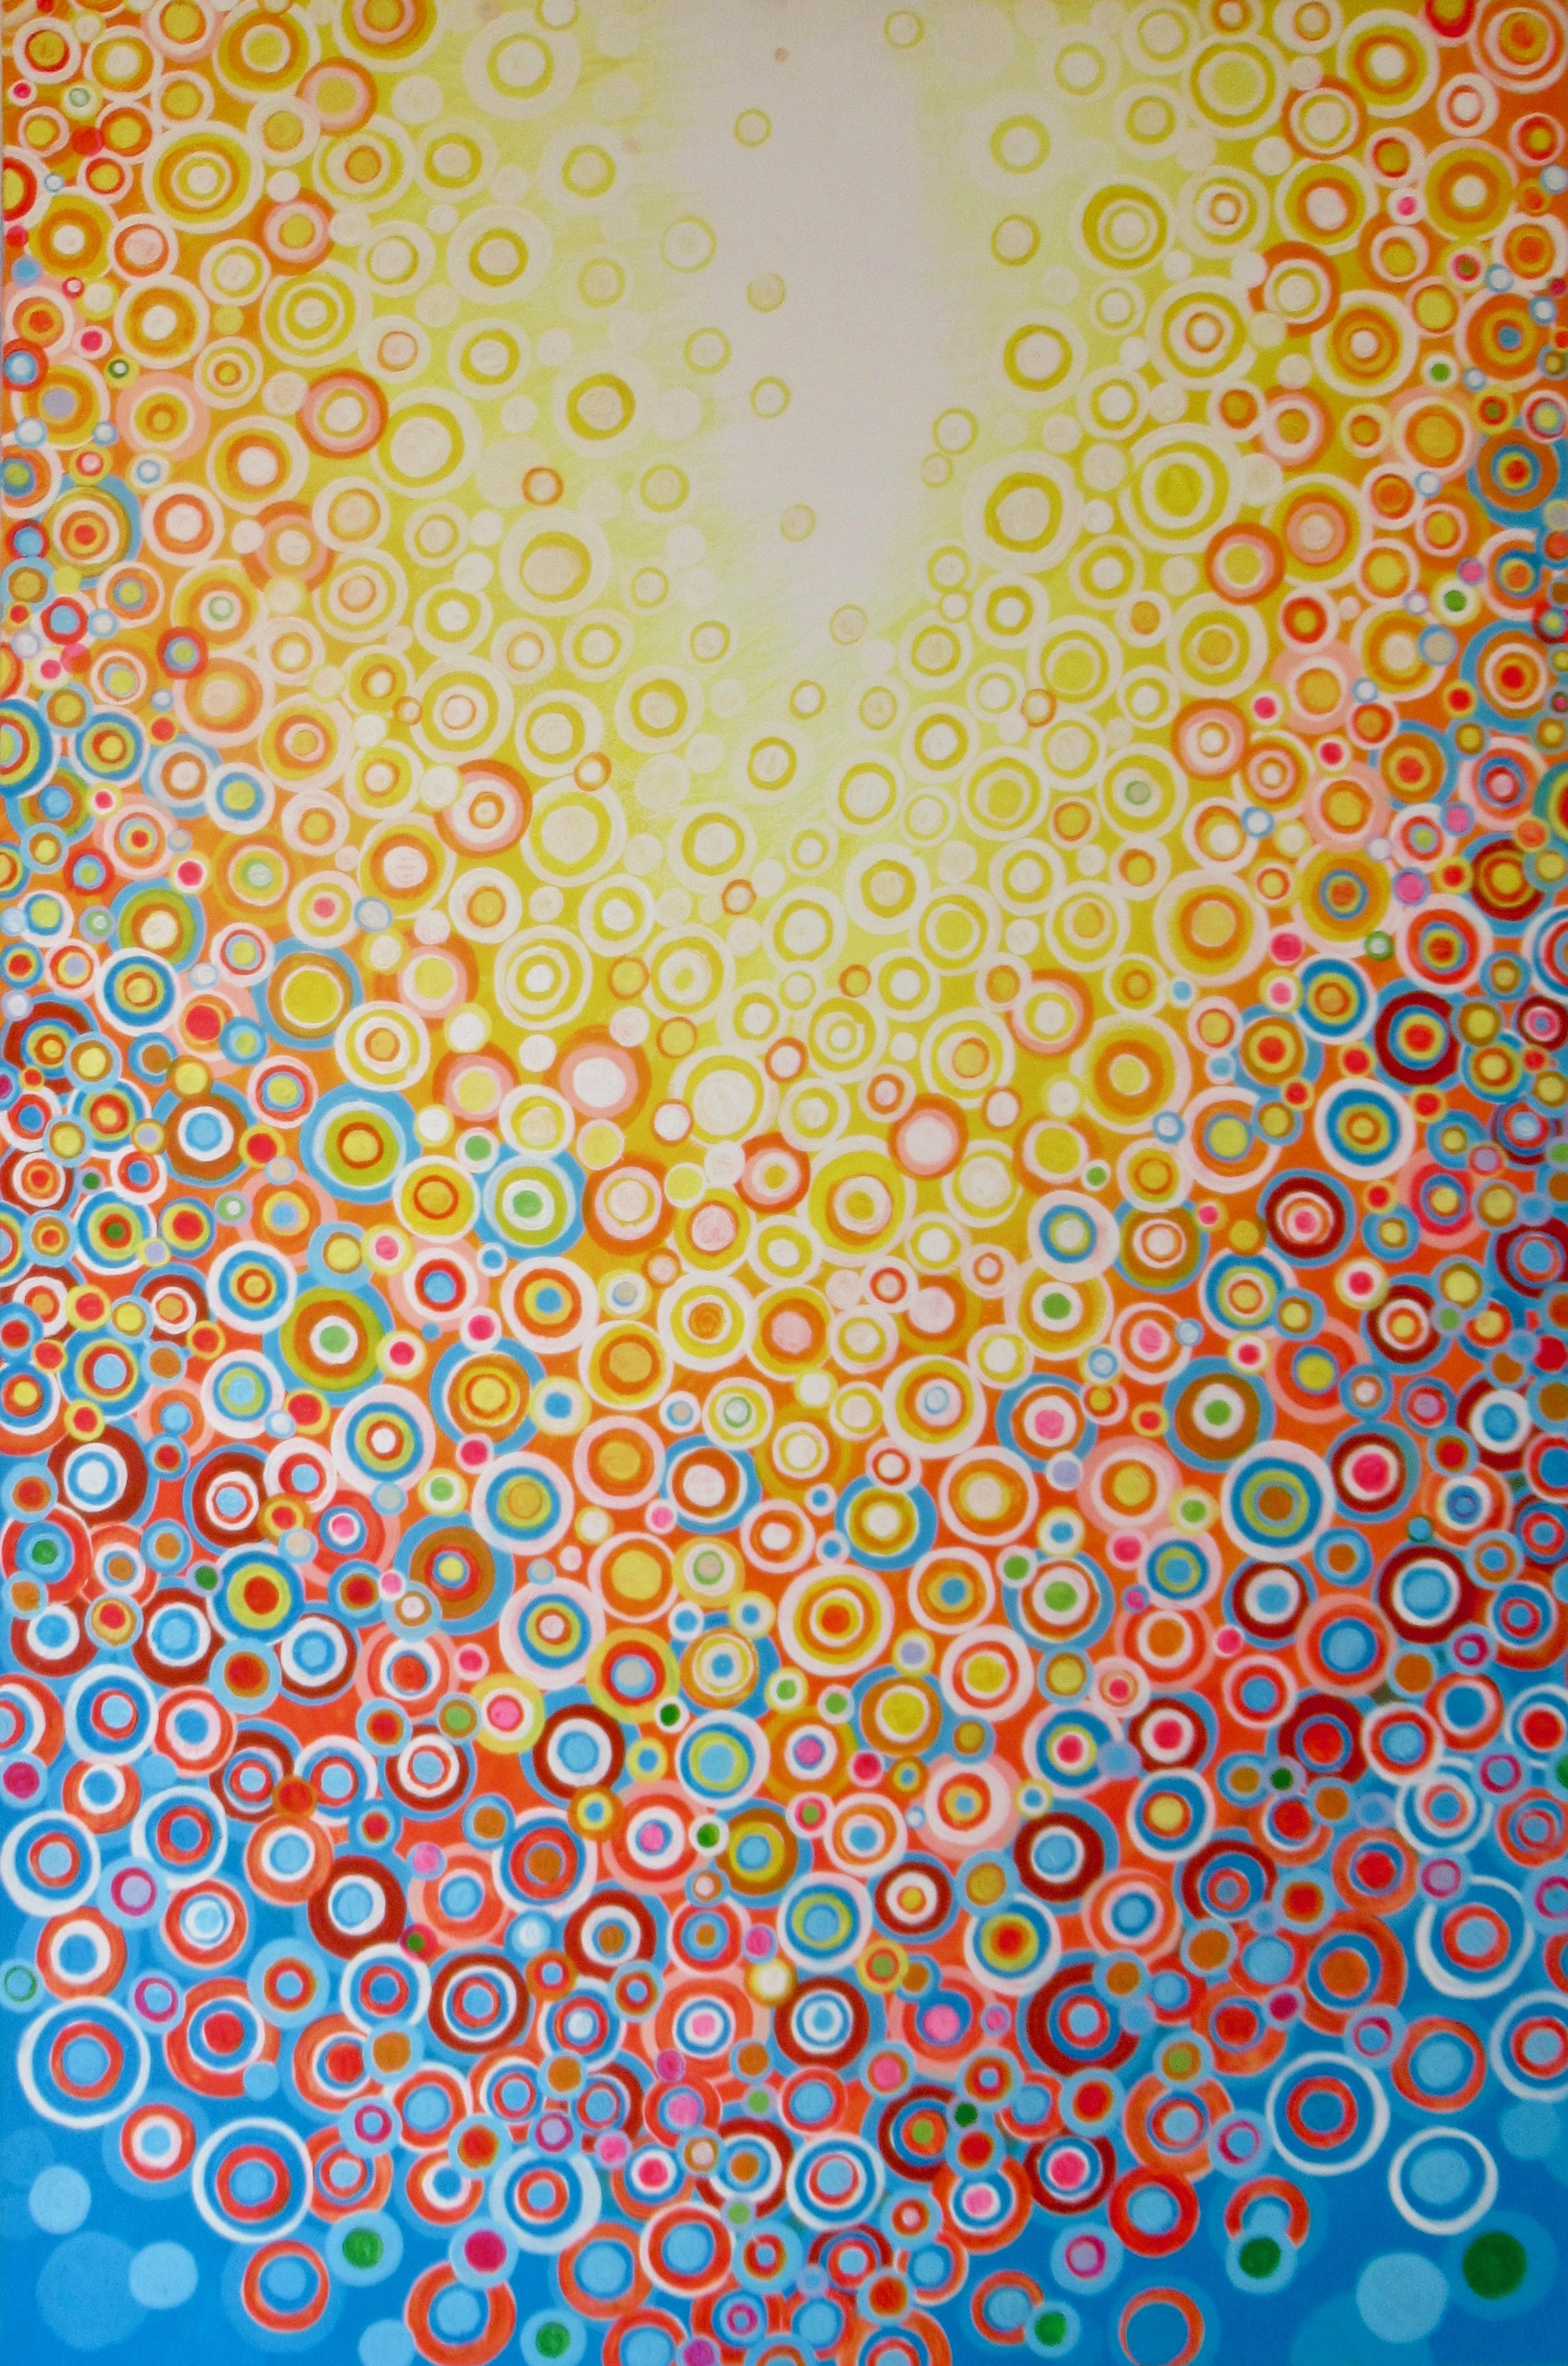 <p>Artist Comments<br />A bright springtime explosion of multi-colored circles. Reminiscent of flower petals floating delicately in the wind, with the mid-morning sun radiating in the sky above. Part of artist Natasha Tayles's signature Circles